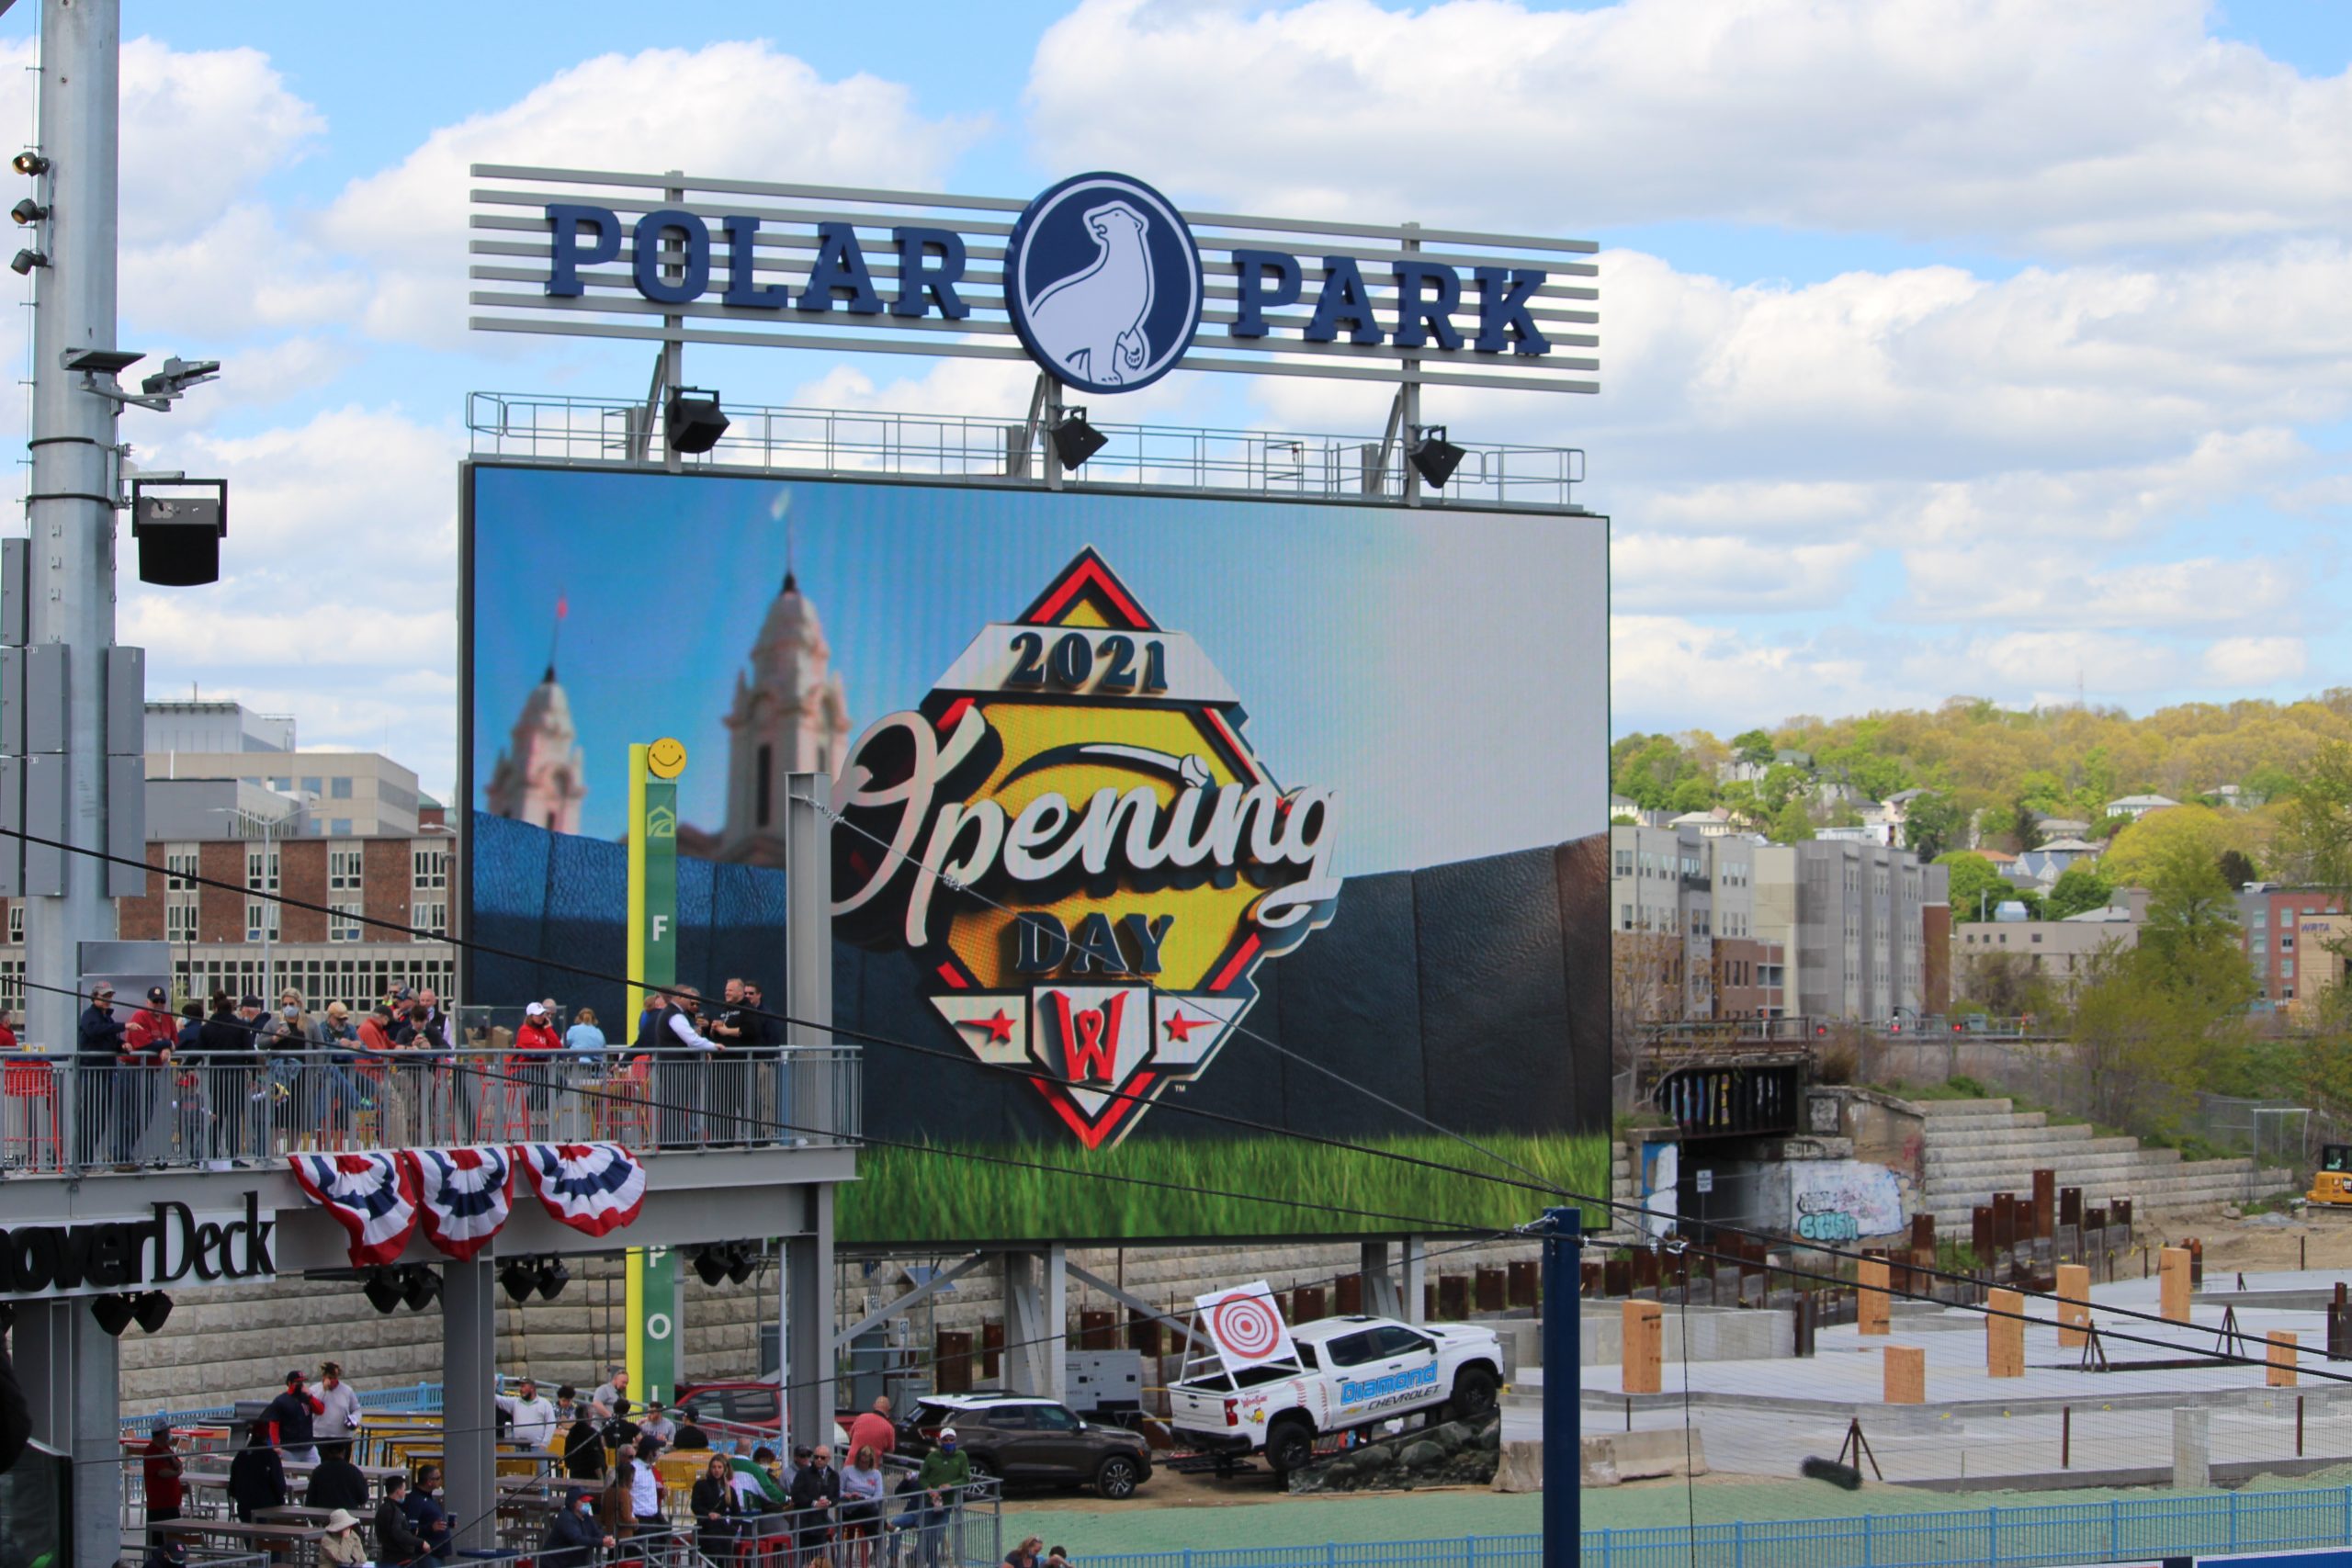 City of Worcester hoping to reap benefits from new Polar Park